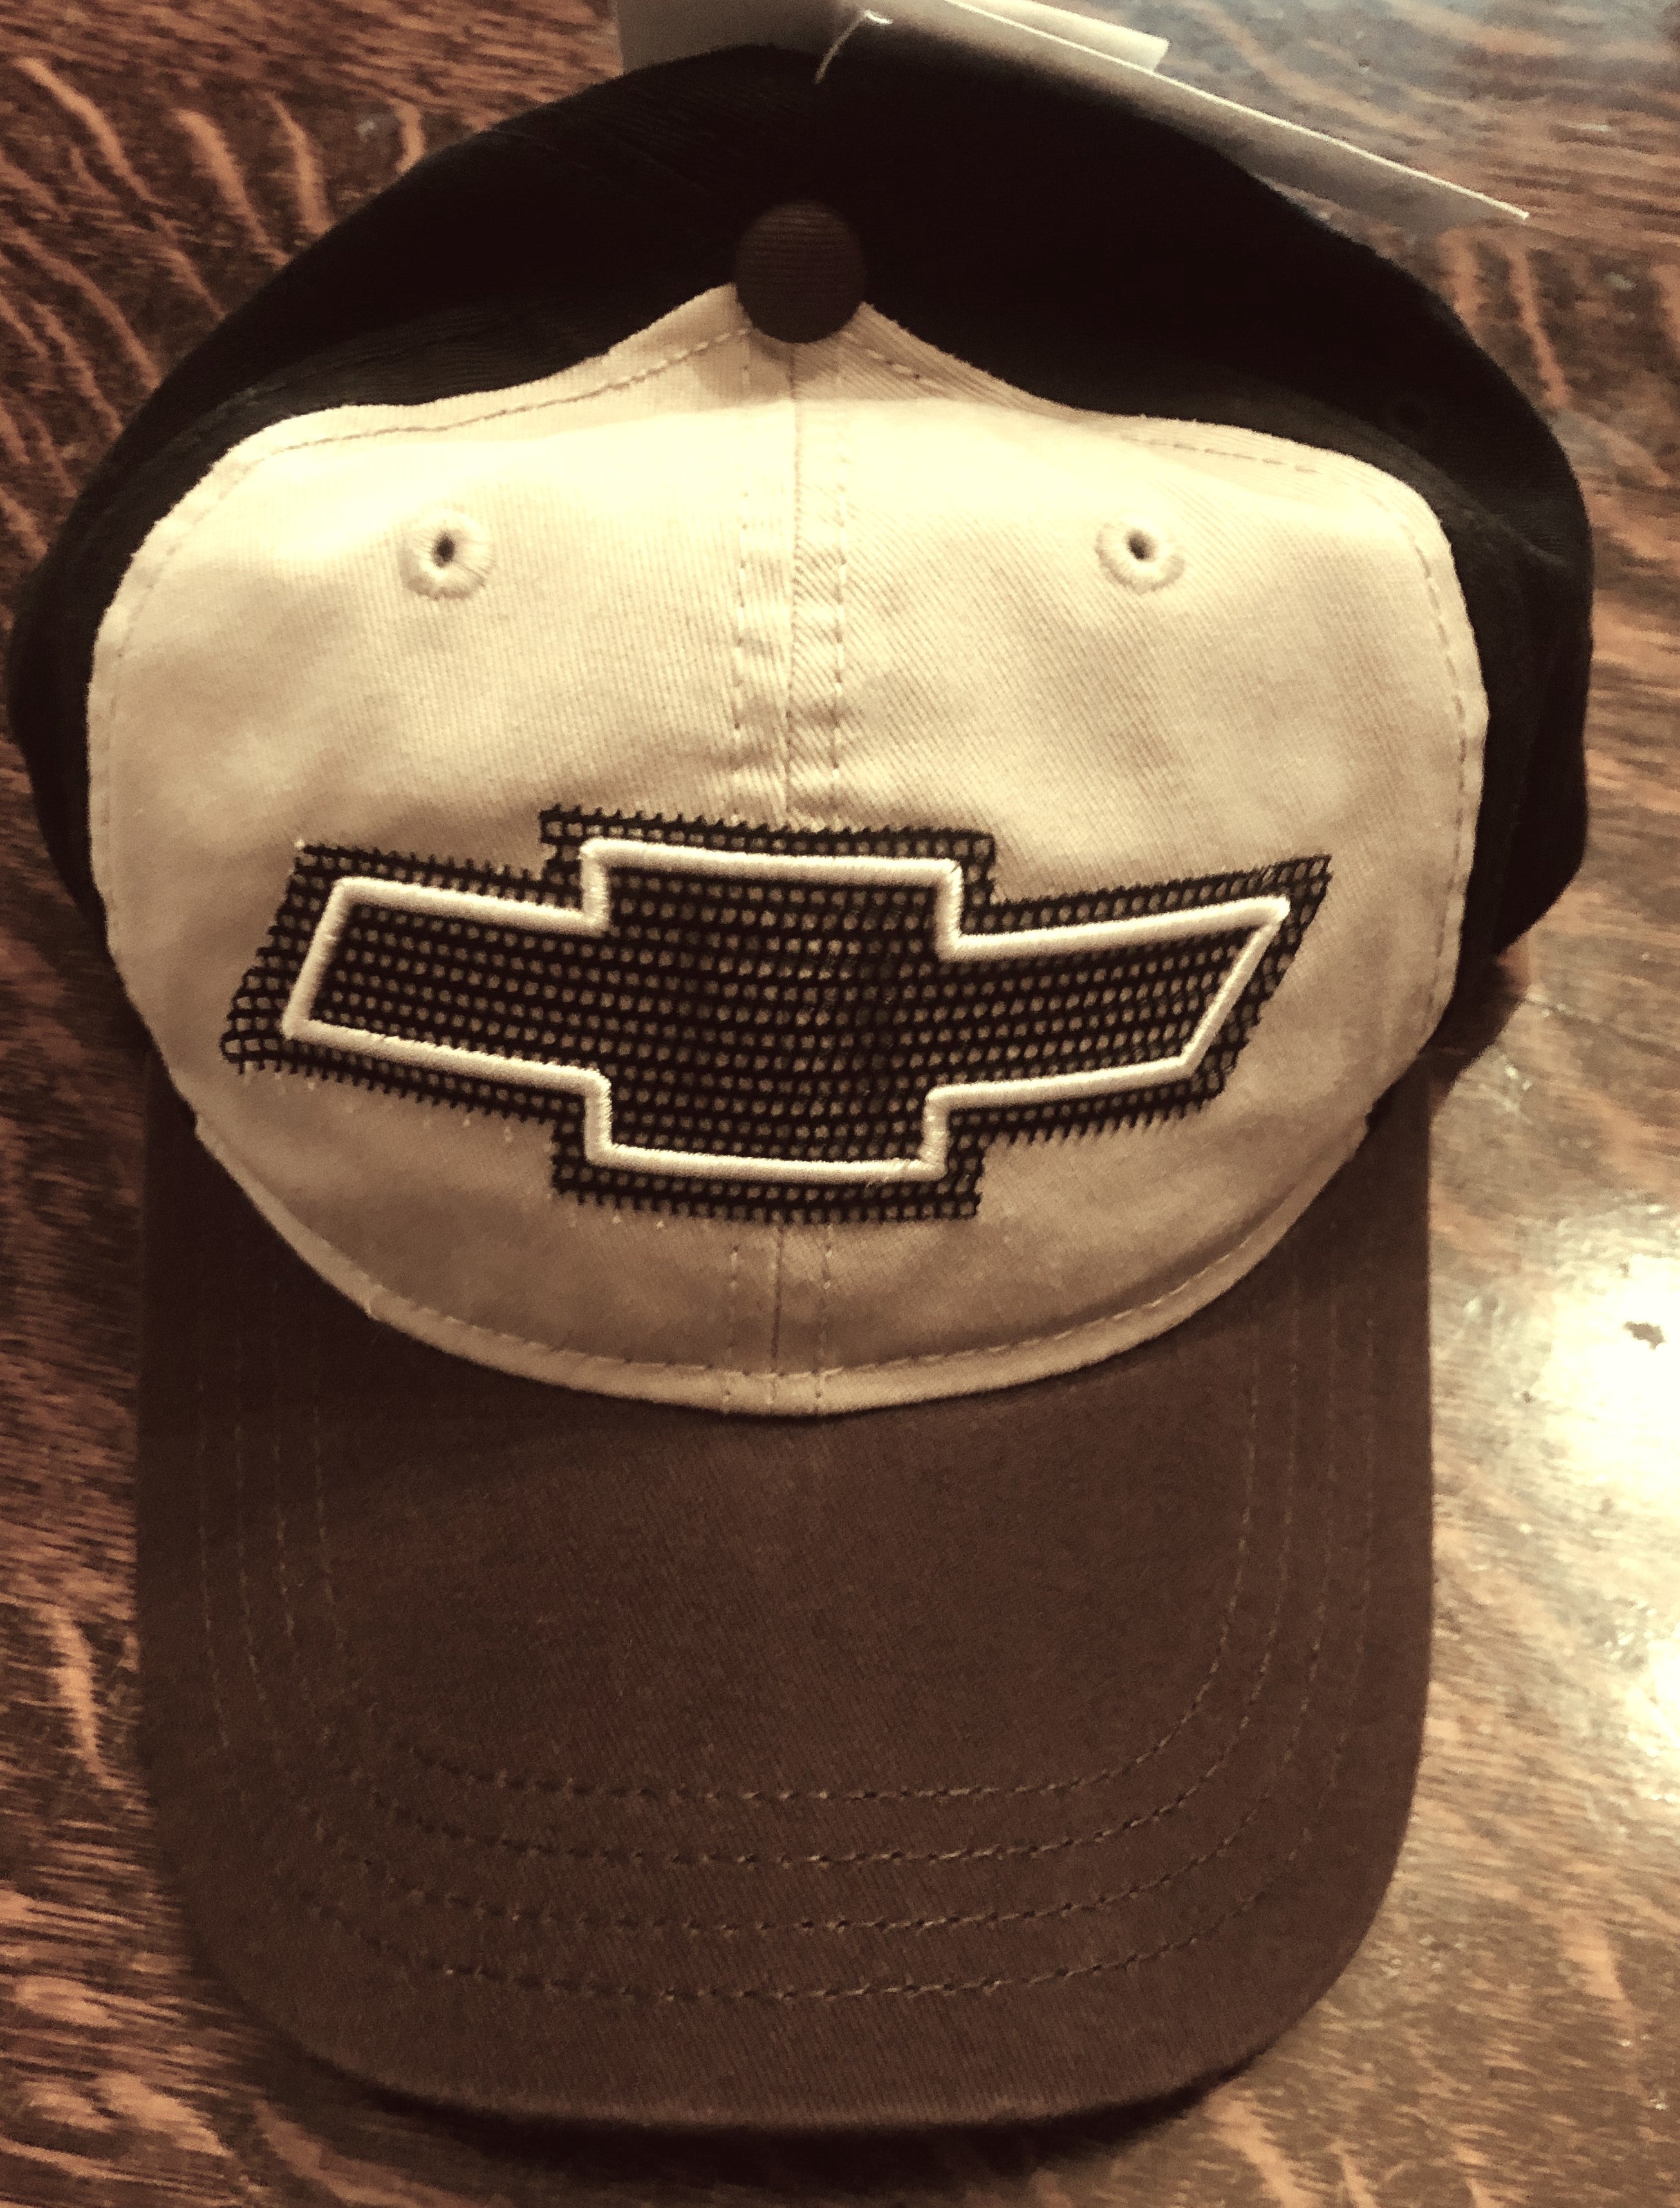 Official Chevy "Bow Tie" emblem ball cap